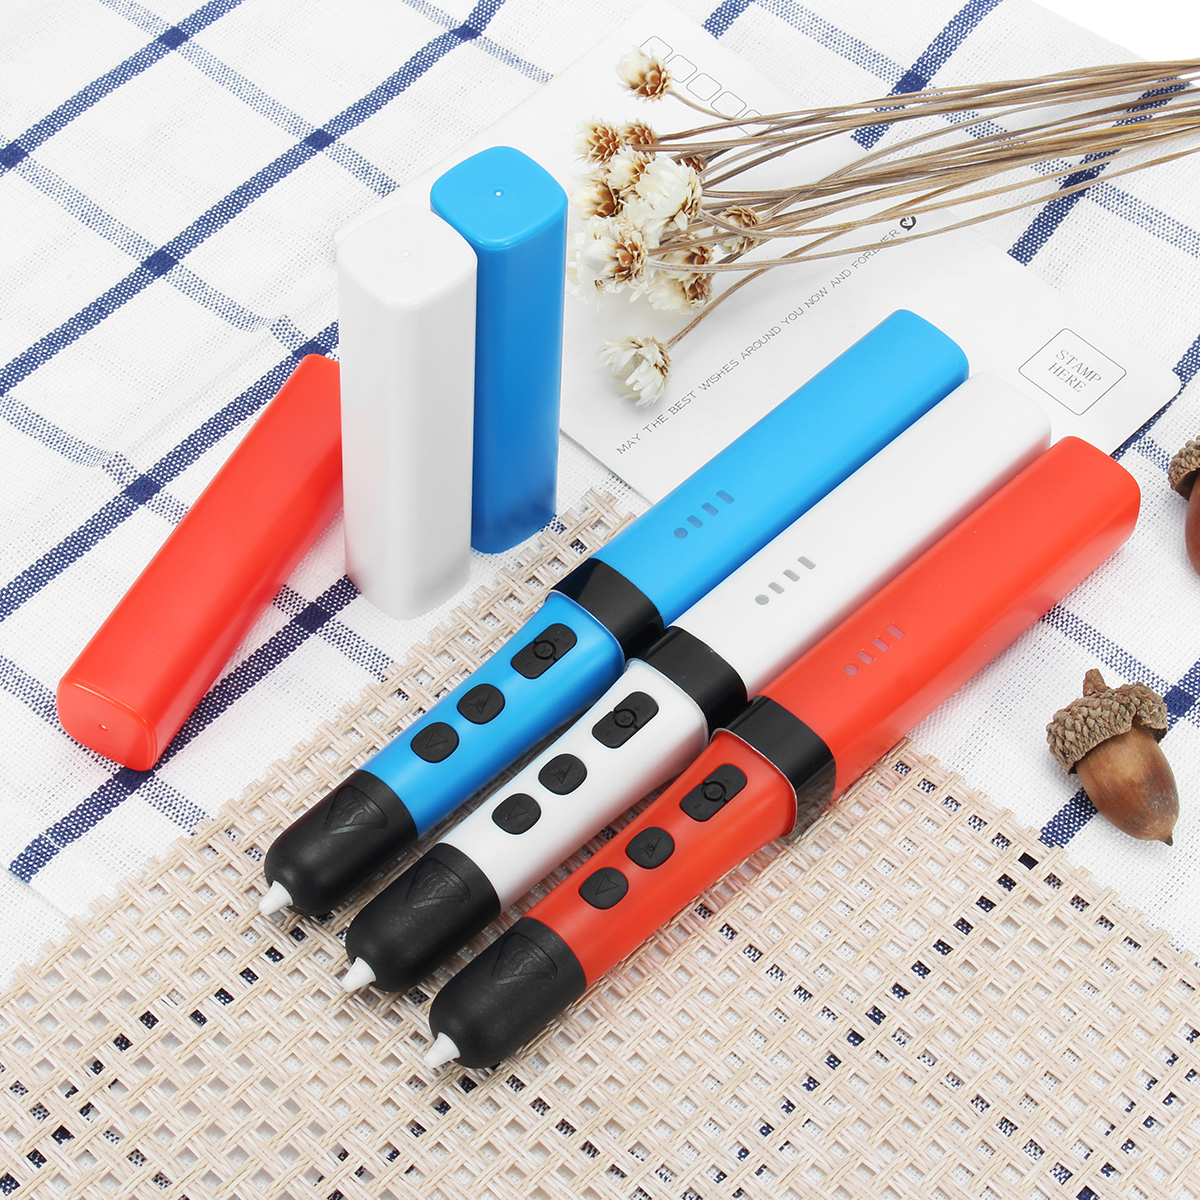 Red/White/Blue 5V/2A 1.75mm 0.7mm Nozzle Low Temperature 3D Printing Pen For Children 17